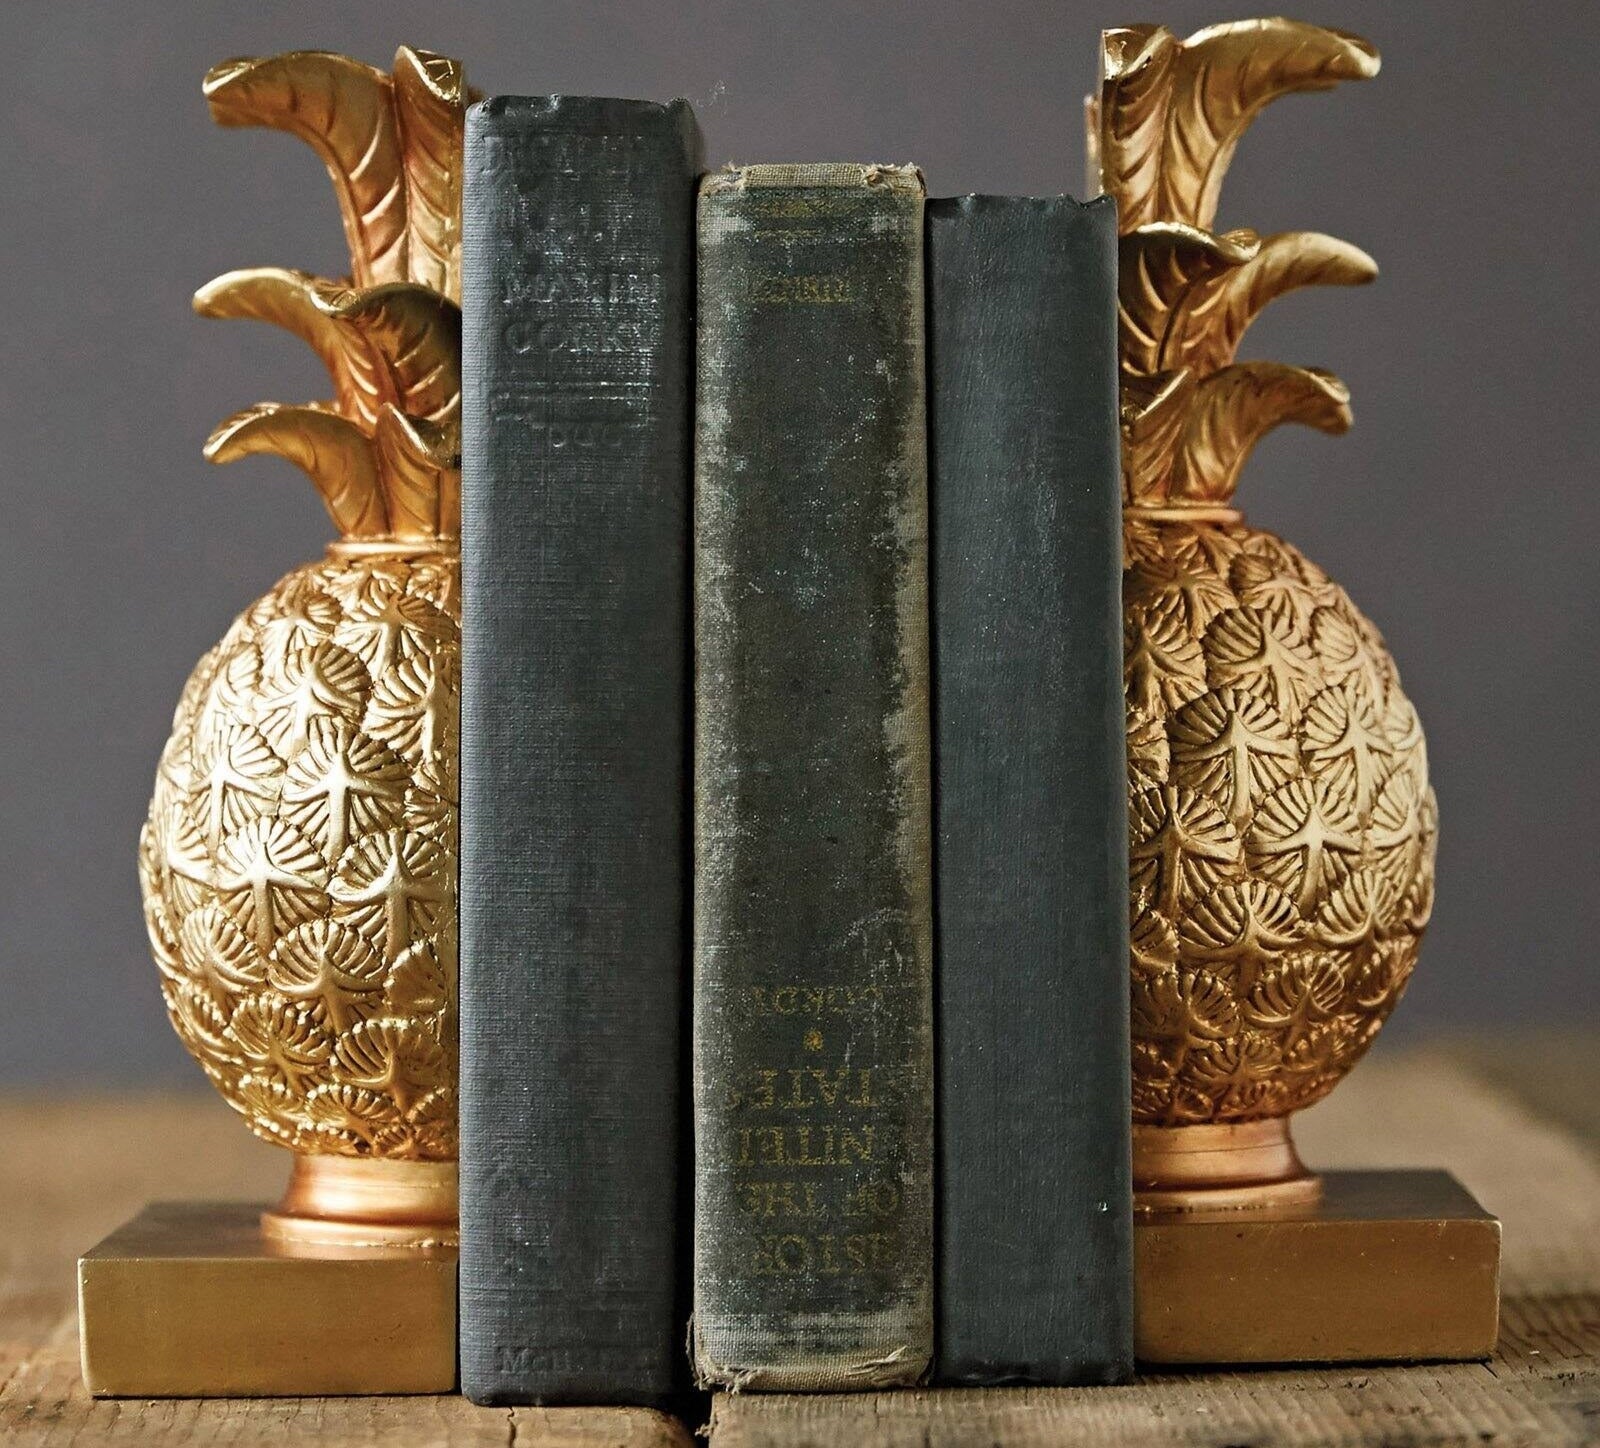 The bookends keeping three books upright